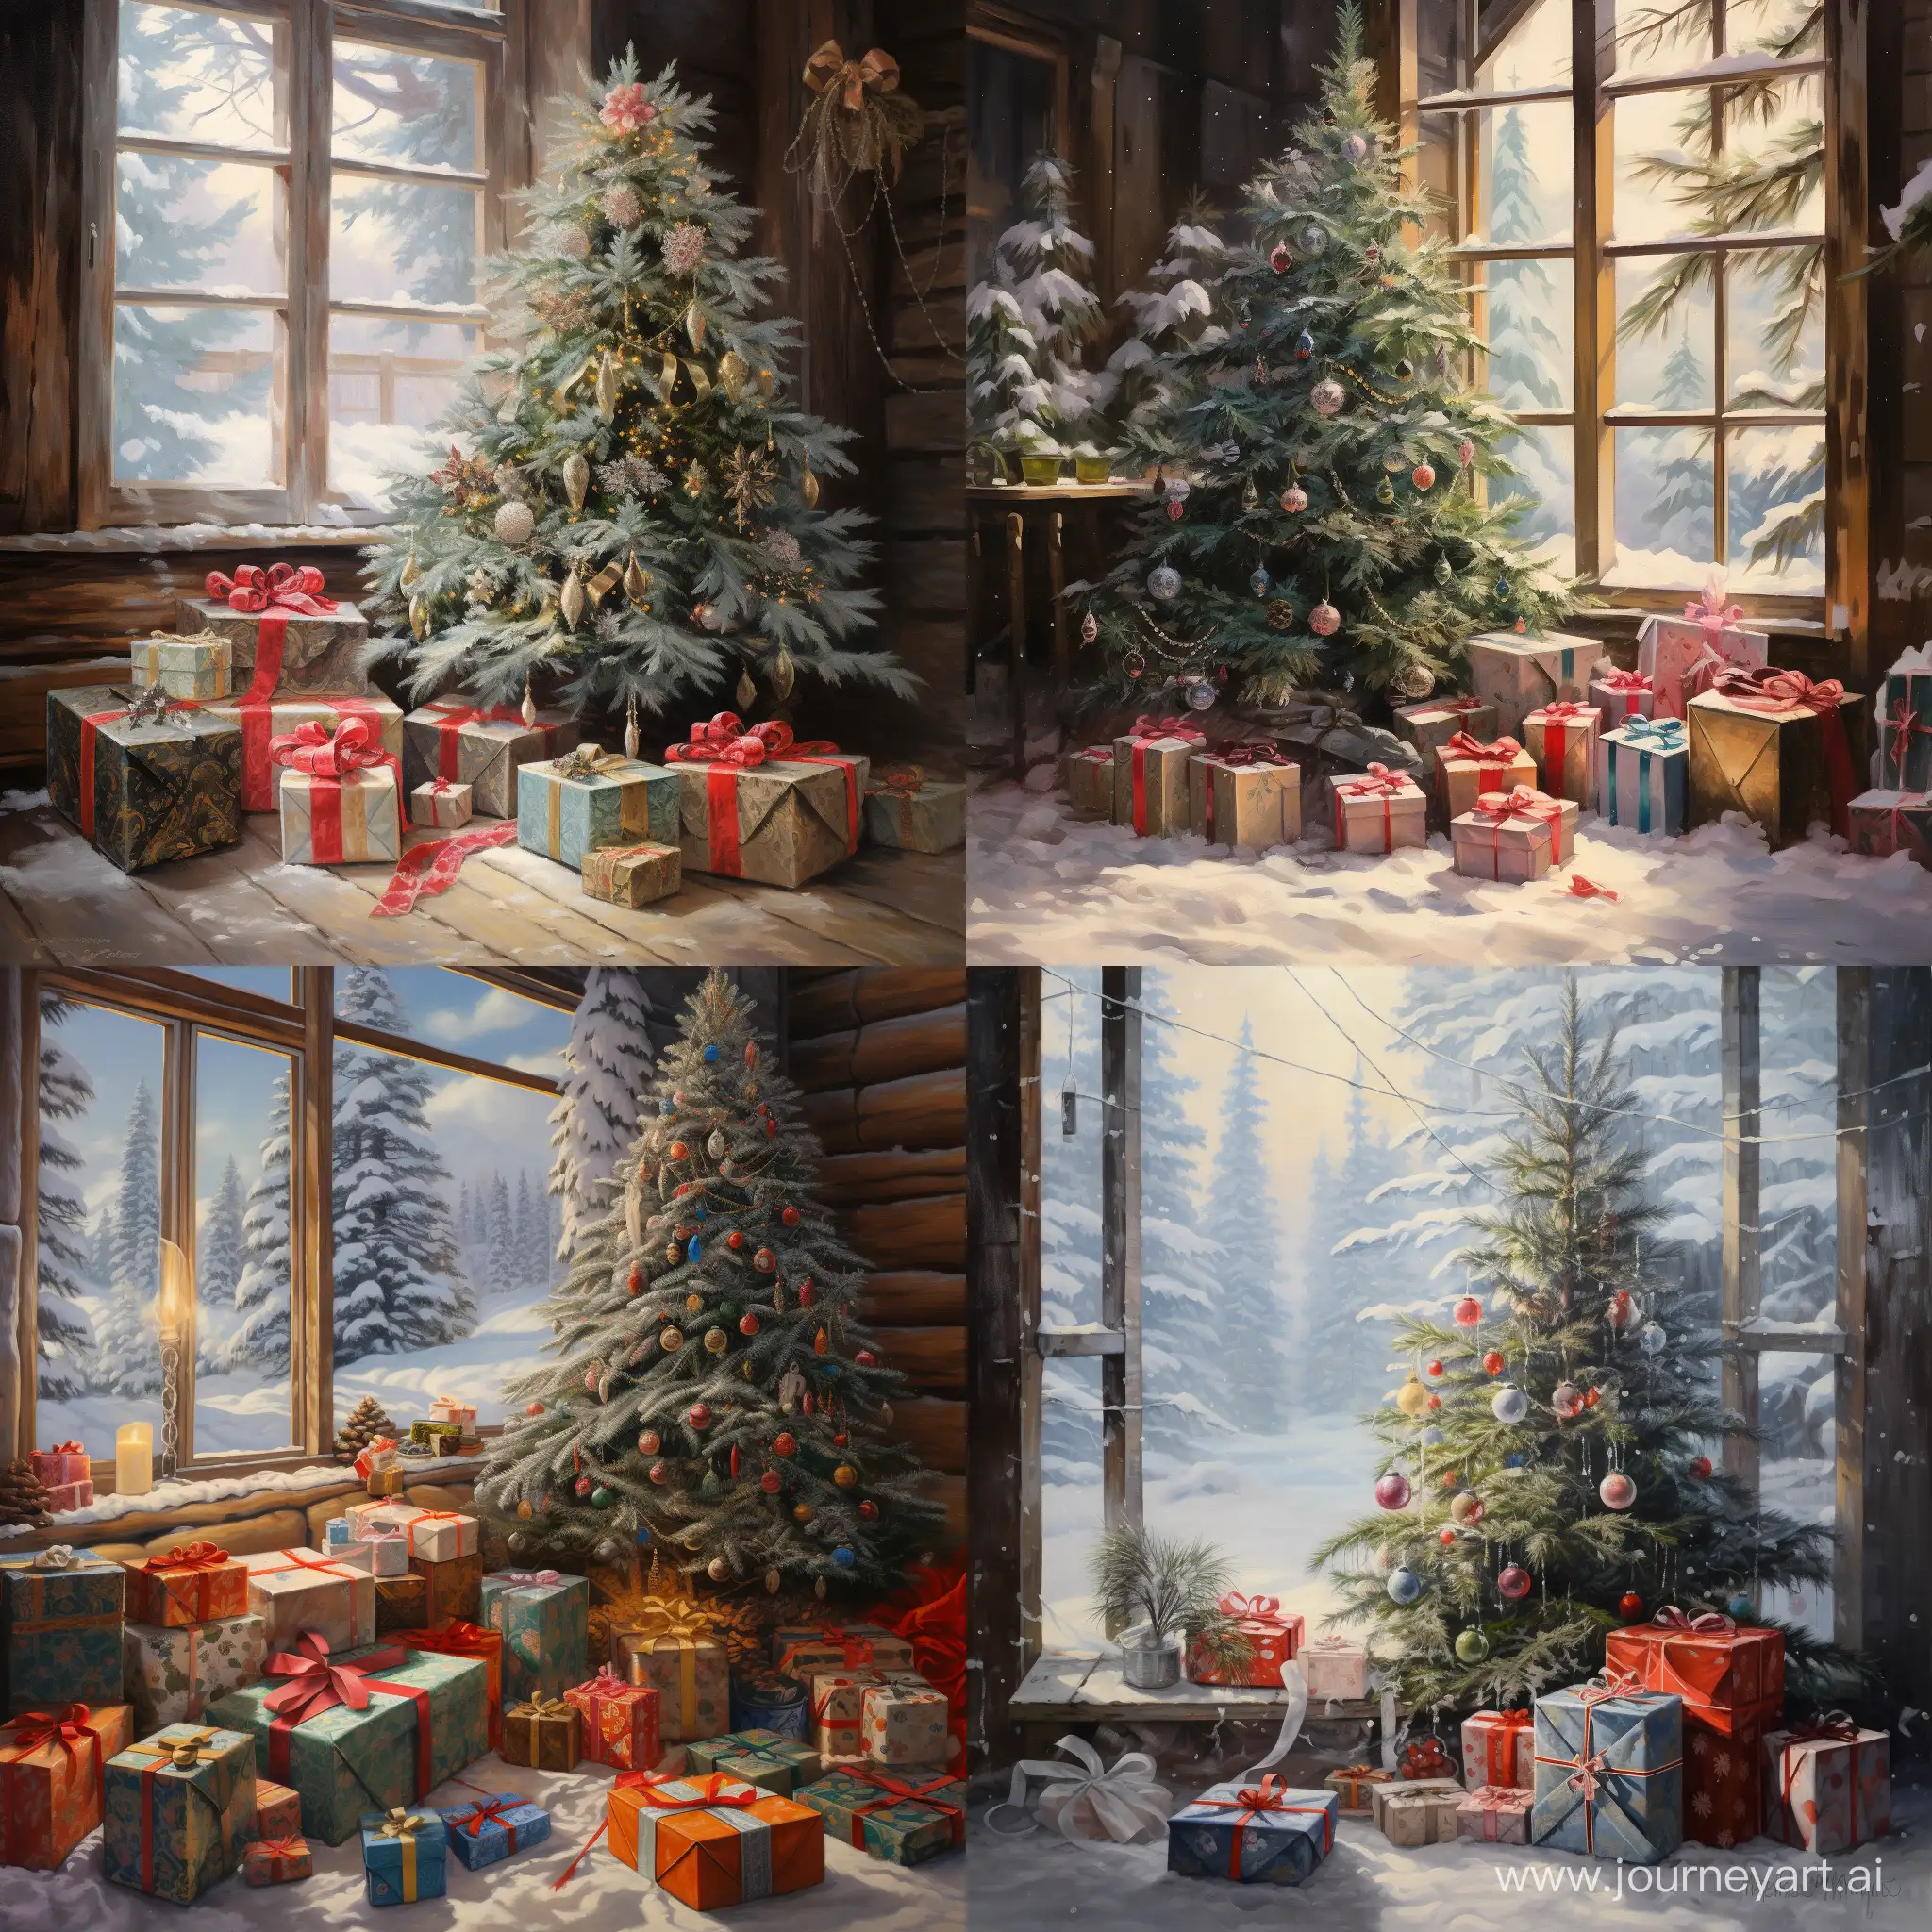 Snowy-Spruce-Trees-with-New-Year-Gifts-Festive-Winter-Scene